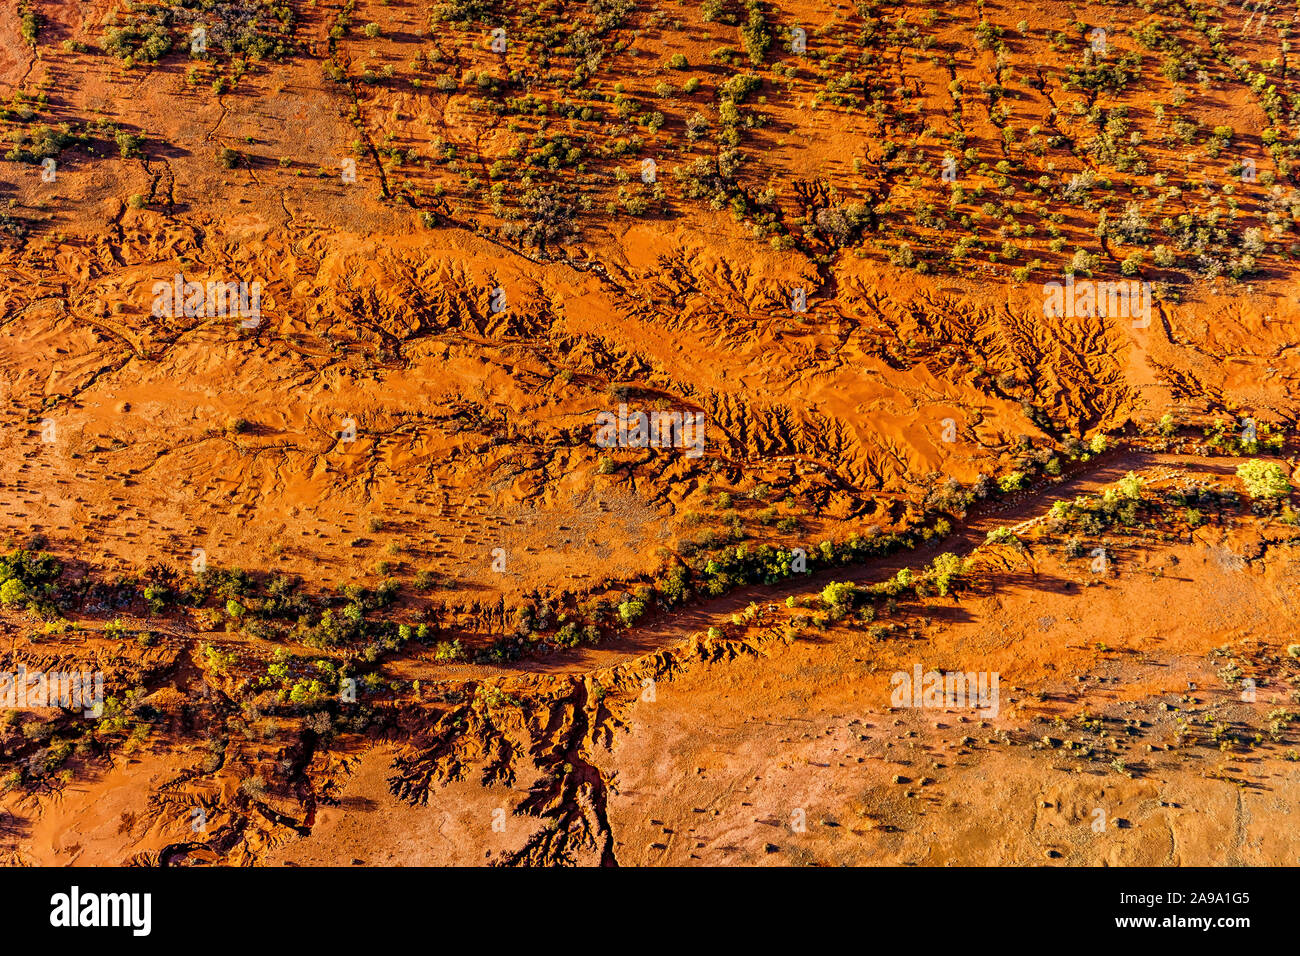 Aerial view of the George Gill ranges in remote central Australia in the Northern Territory Stock Photo